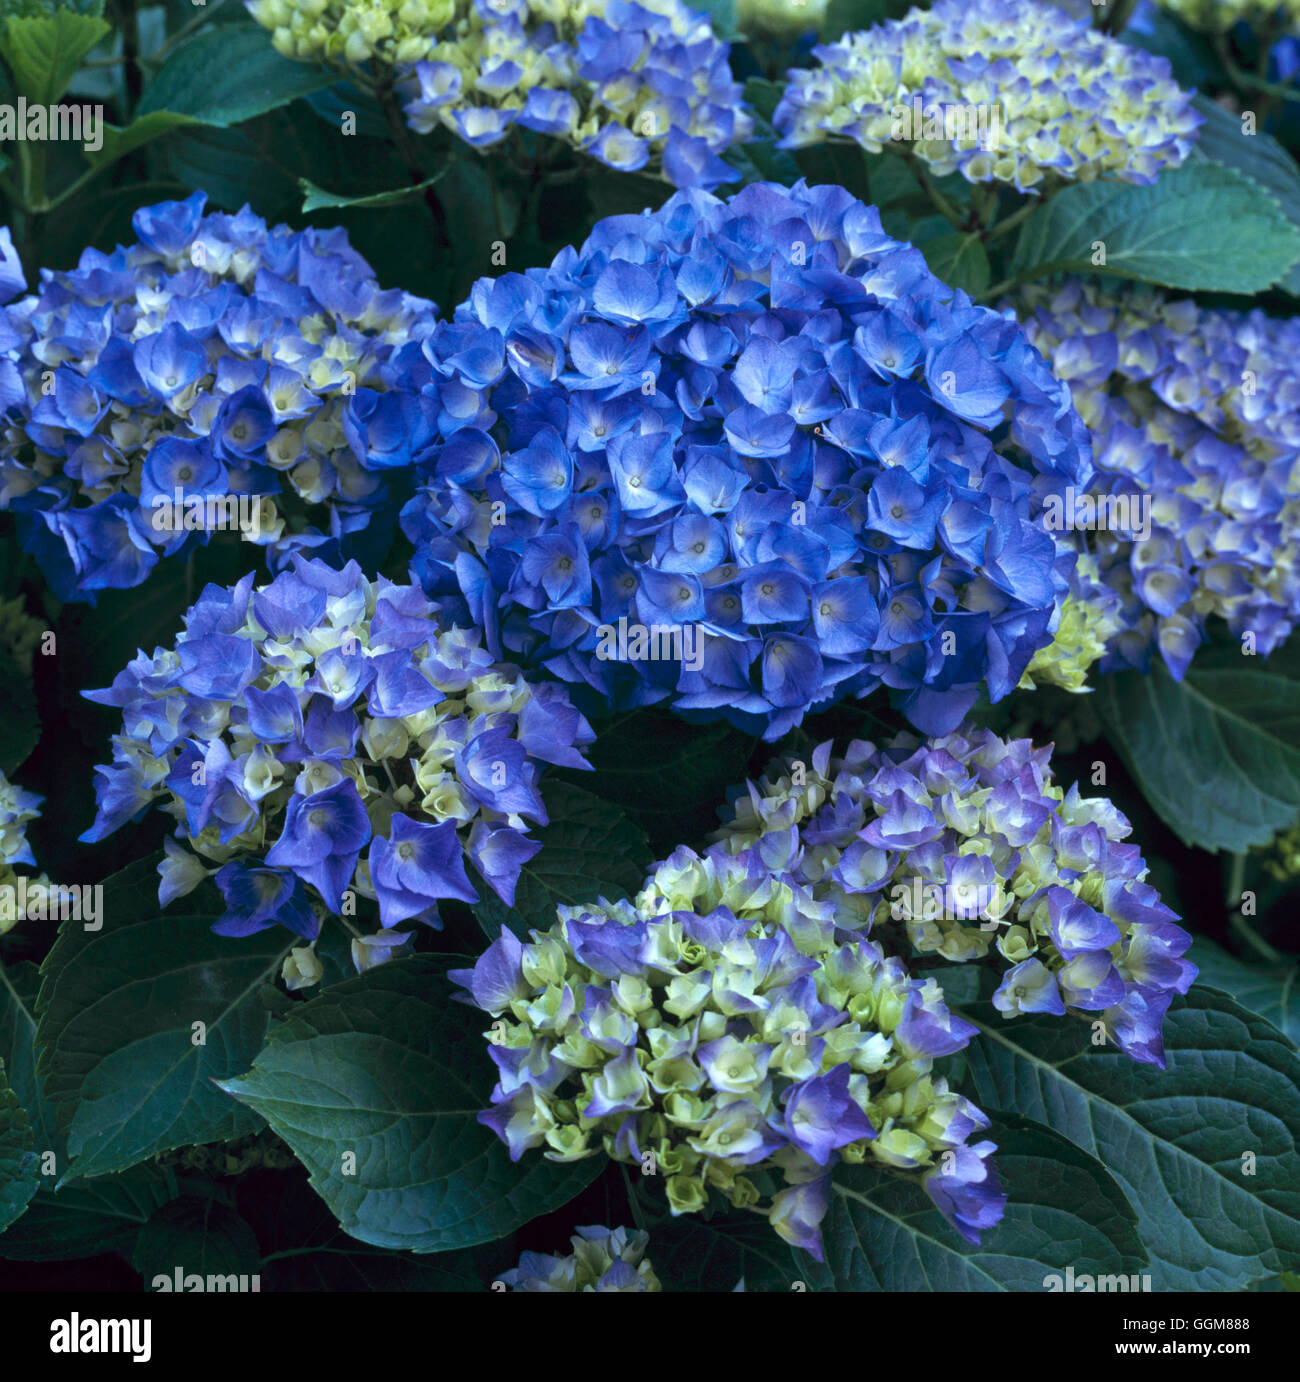 Hydrangea Macrophylla Renate Steiniger Hortensia Hydrangea High Resolution  Stock Photography and Images - Alamy